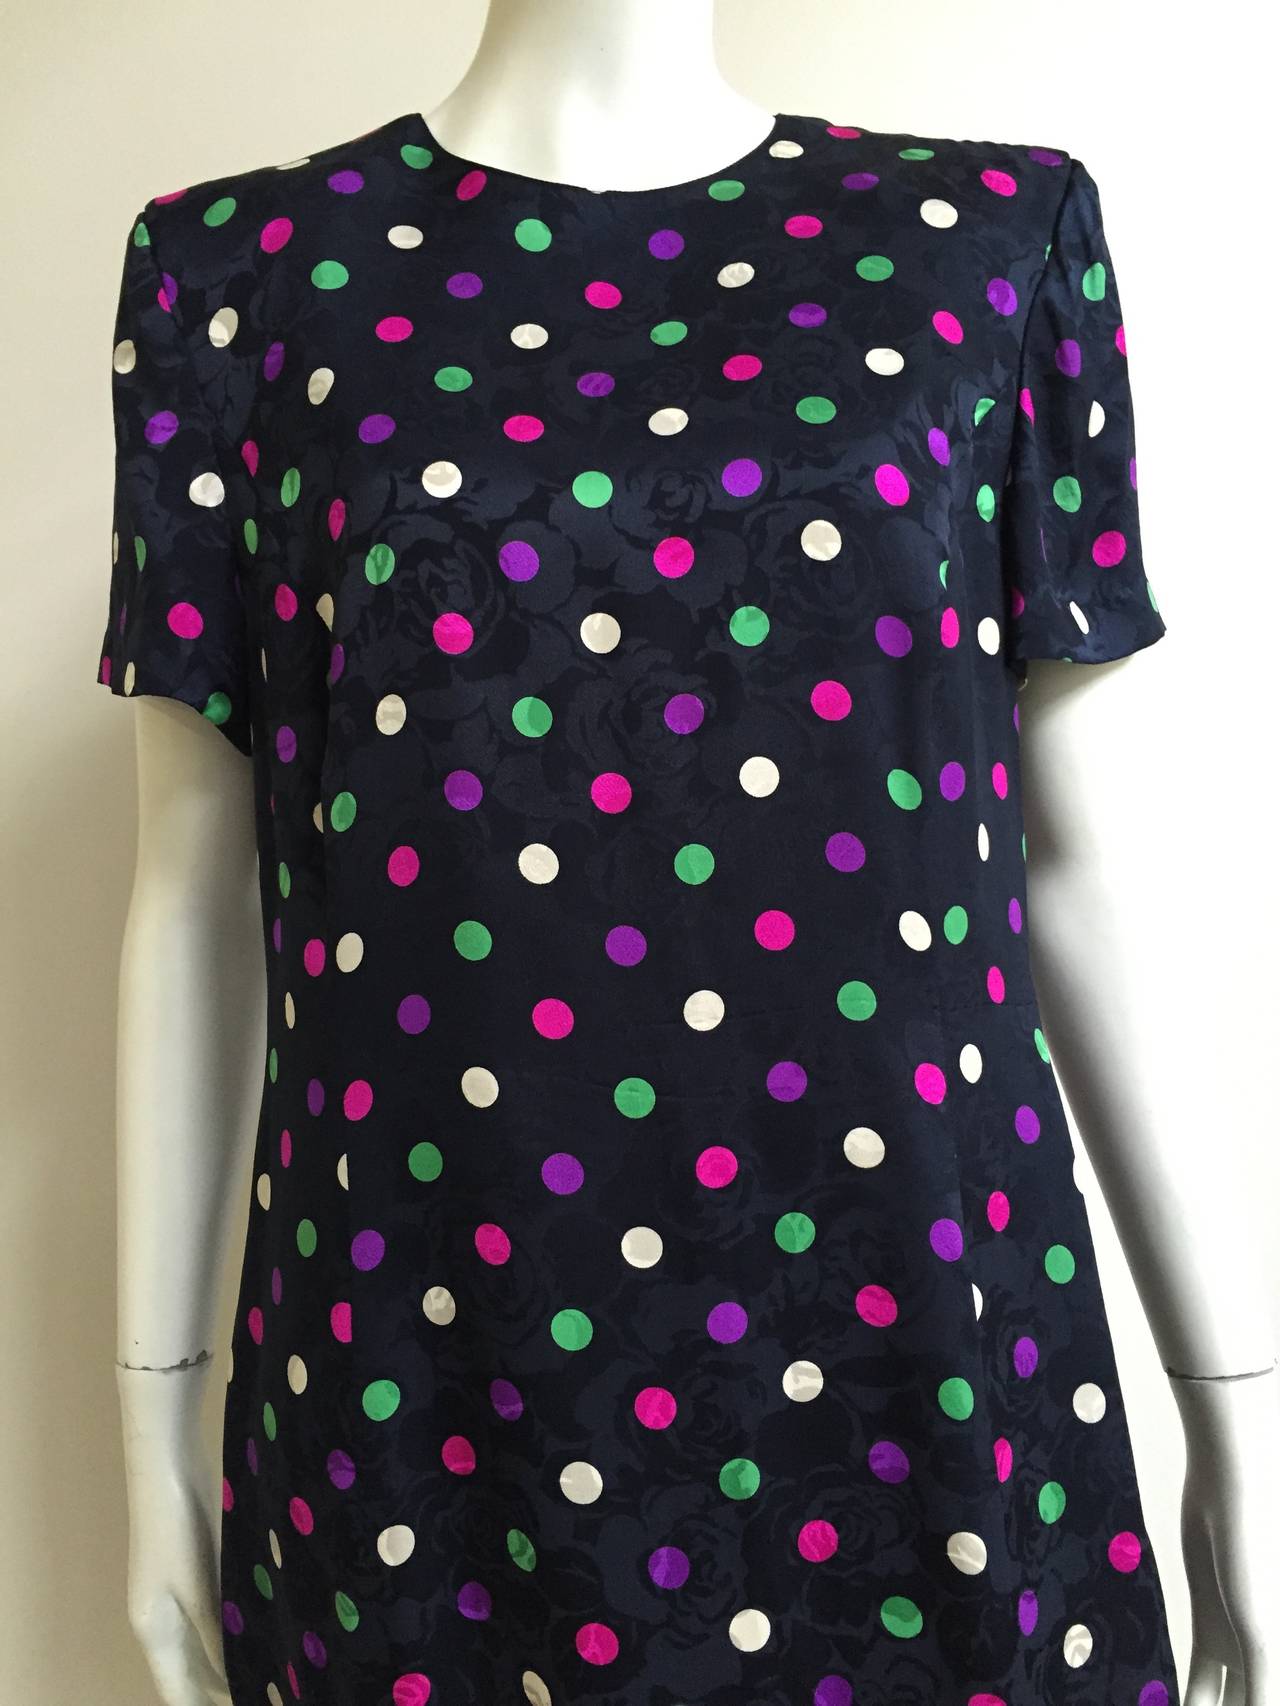 Louis Feraud 1980s silk navy with purple ~ pink ~ white ~ mint polka dots with ruffles at bottom. Dress is lined. Original size 12 but fits more like a modern size 10 ( Please see & use measurements ).
Measurements are:
41" bust
36"